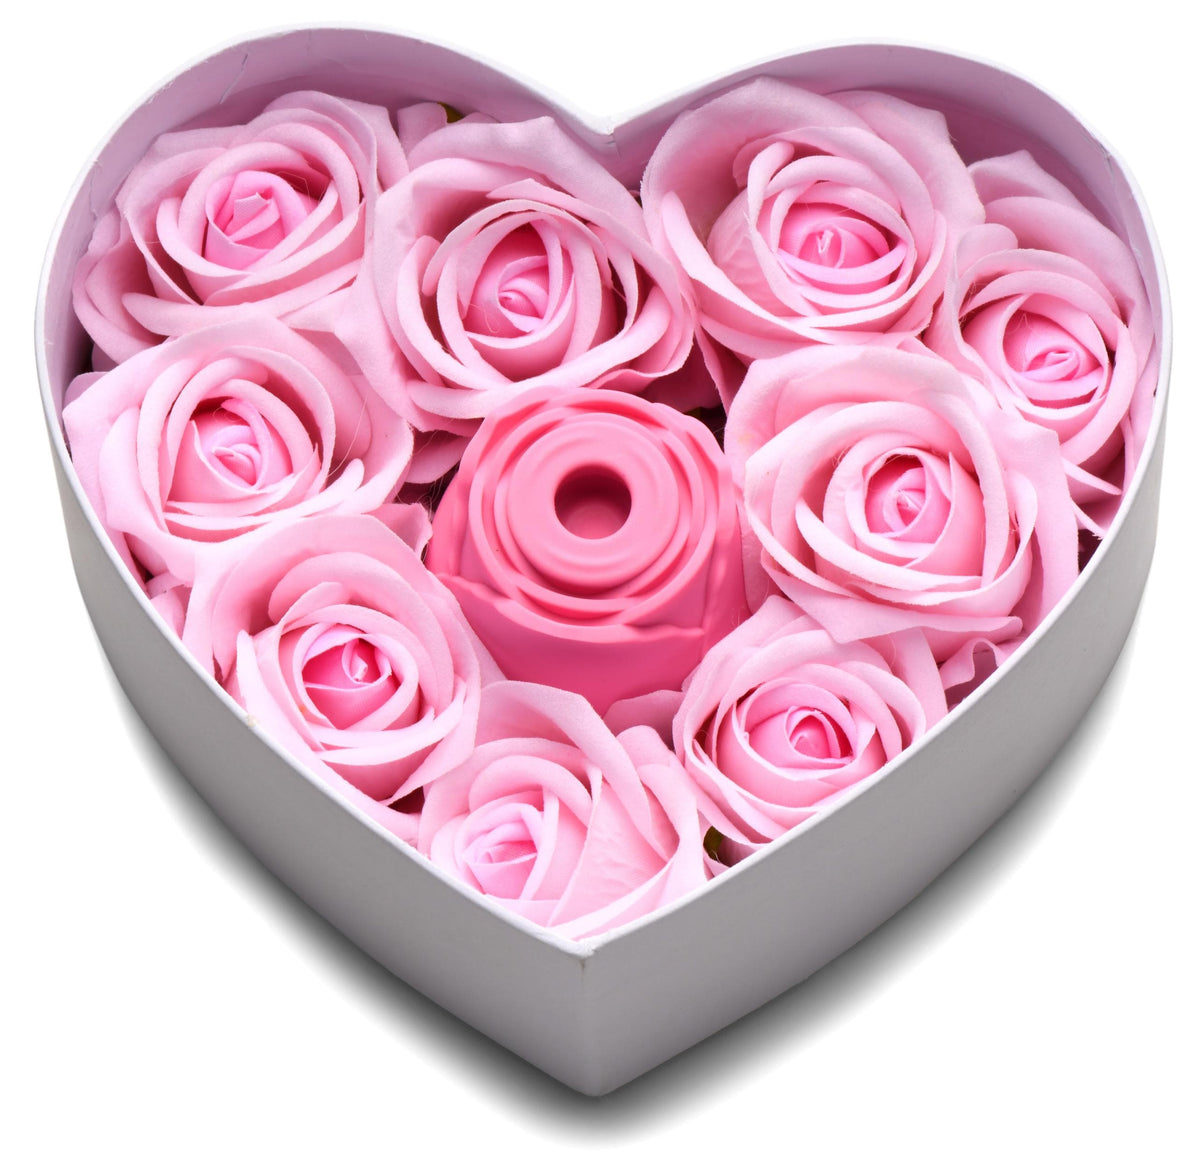 the rose lovers gift box pink